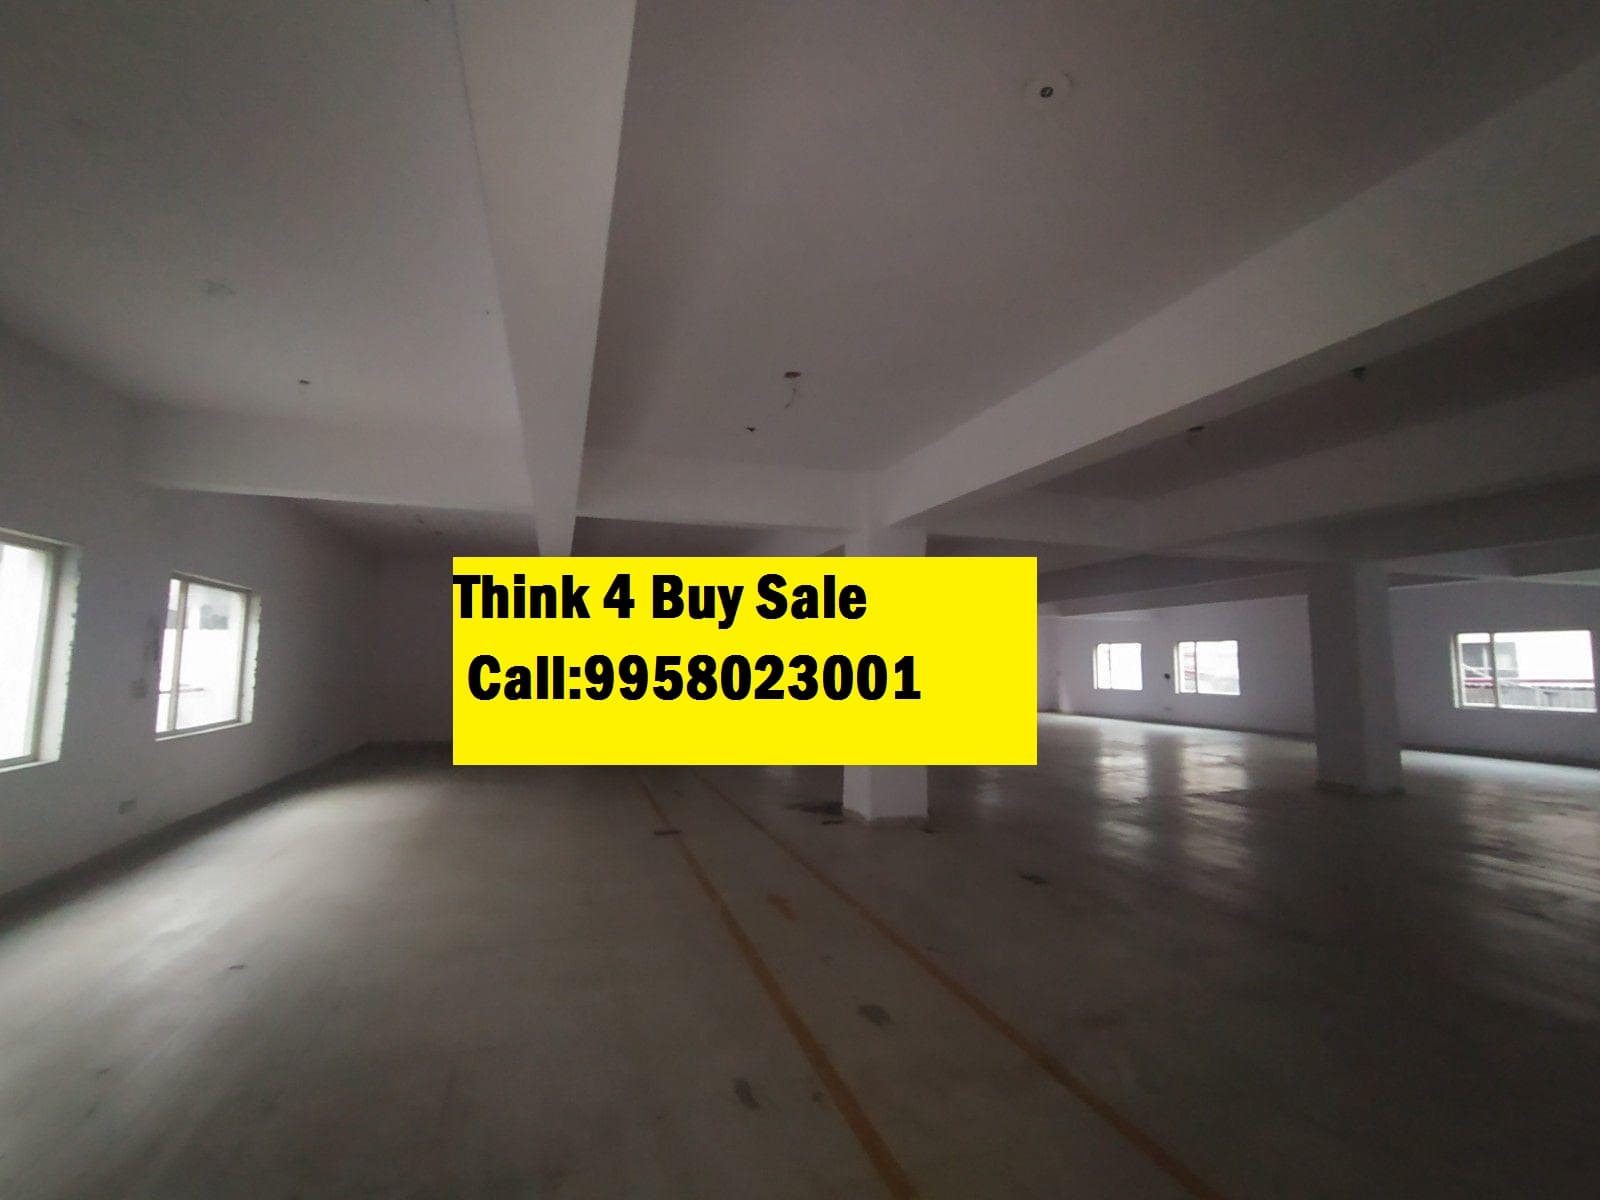 factory for rent in sahibabad industrial area